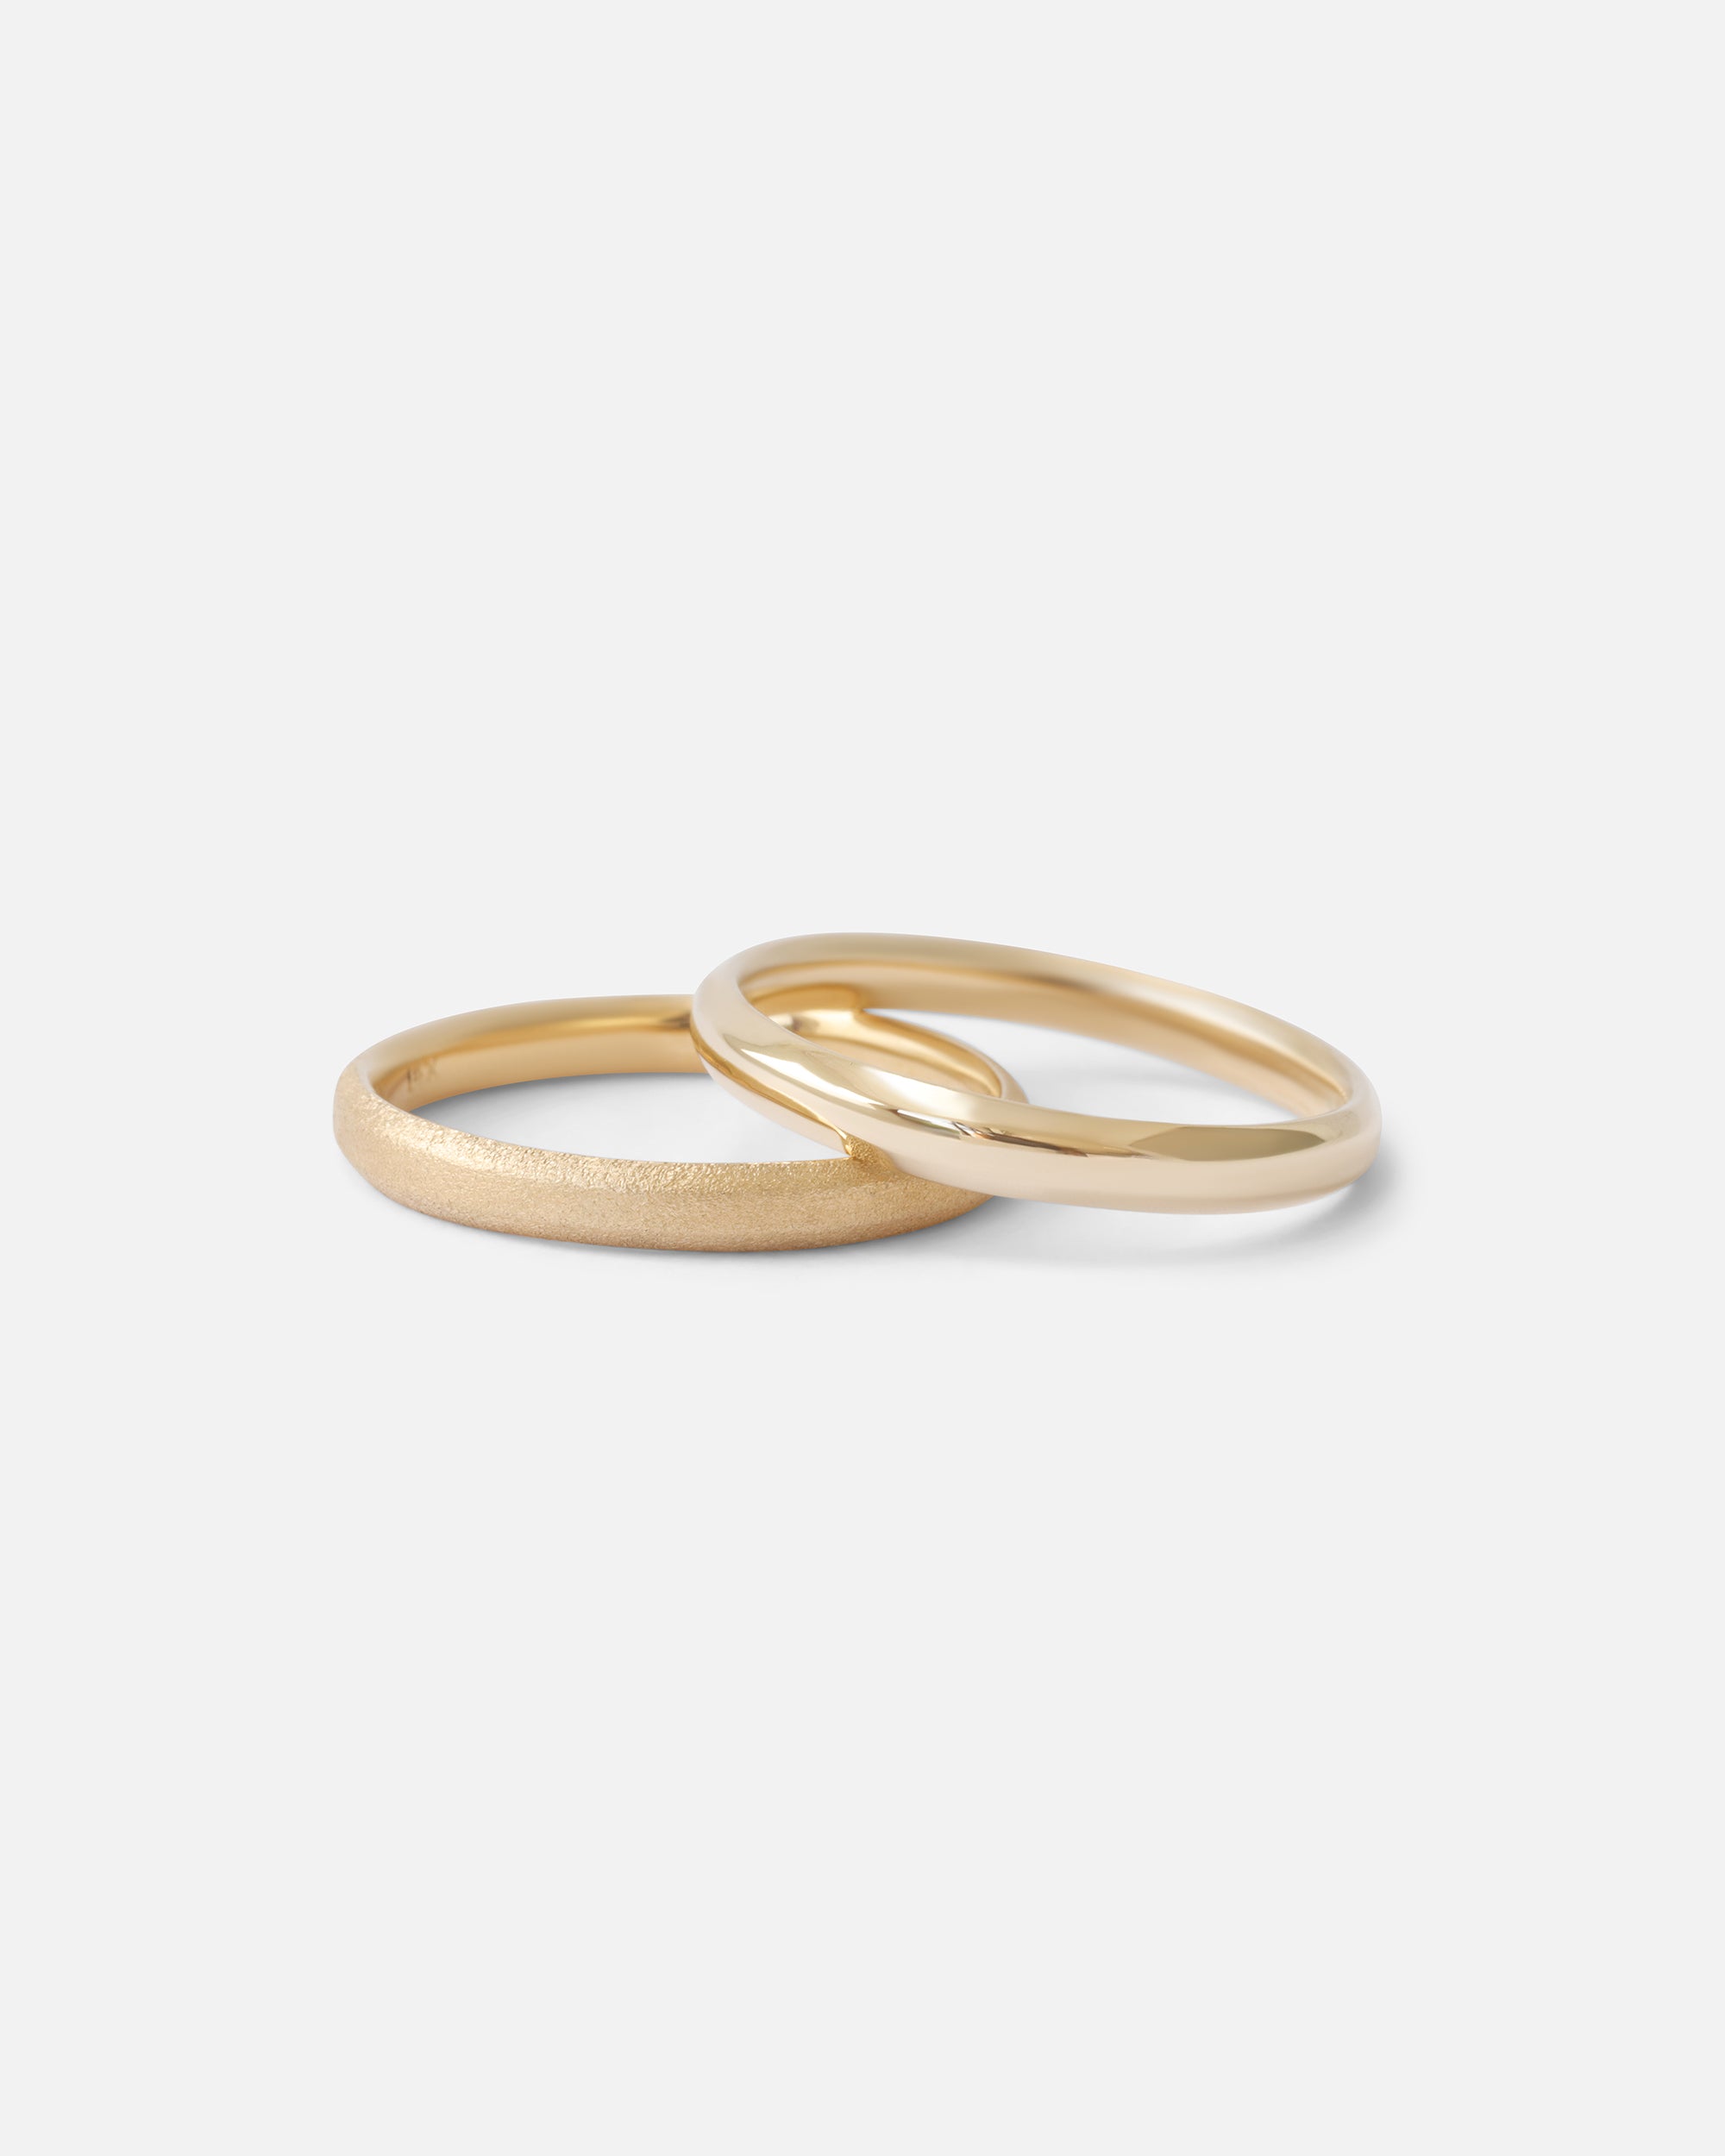 Hex Band / Polished By O Channell Designs